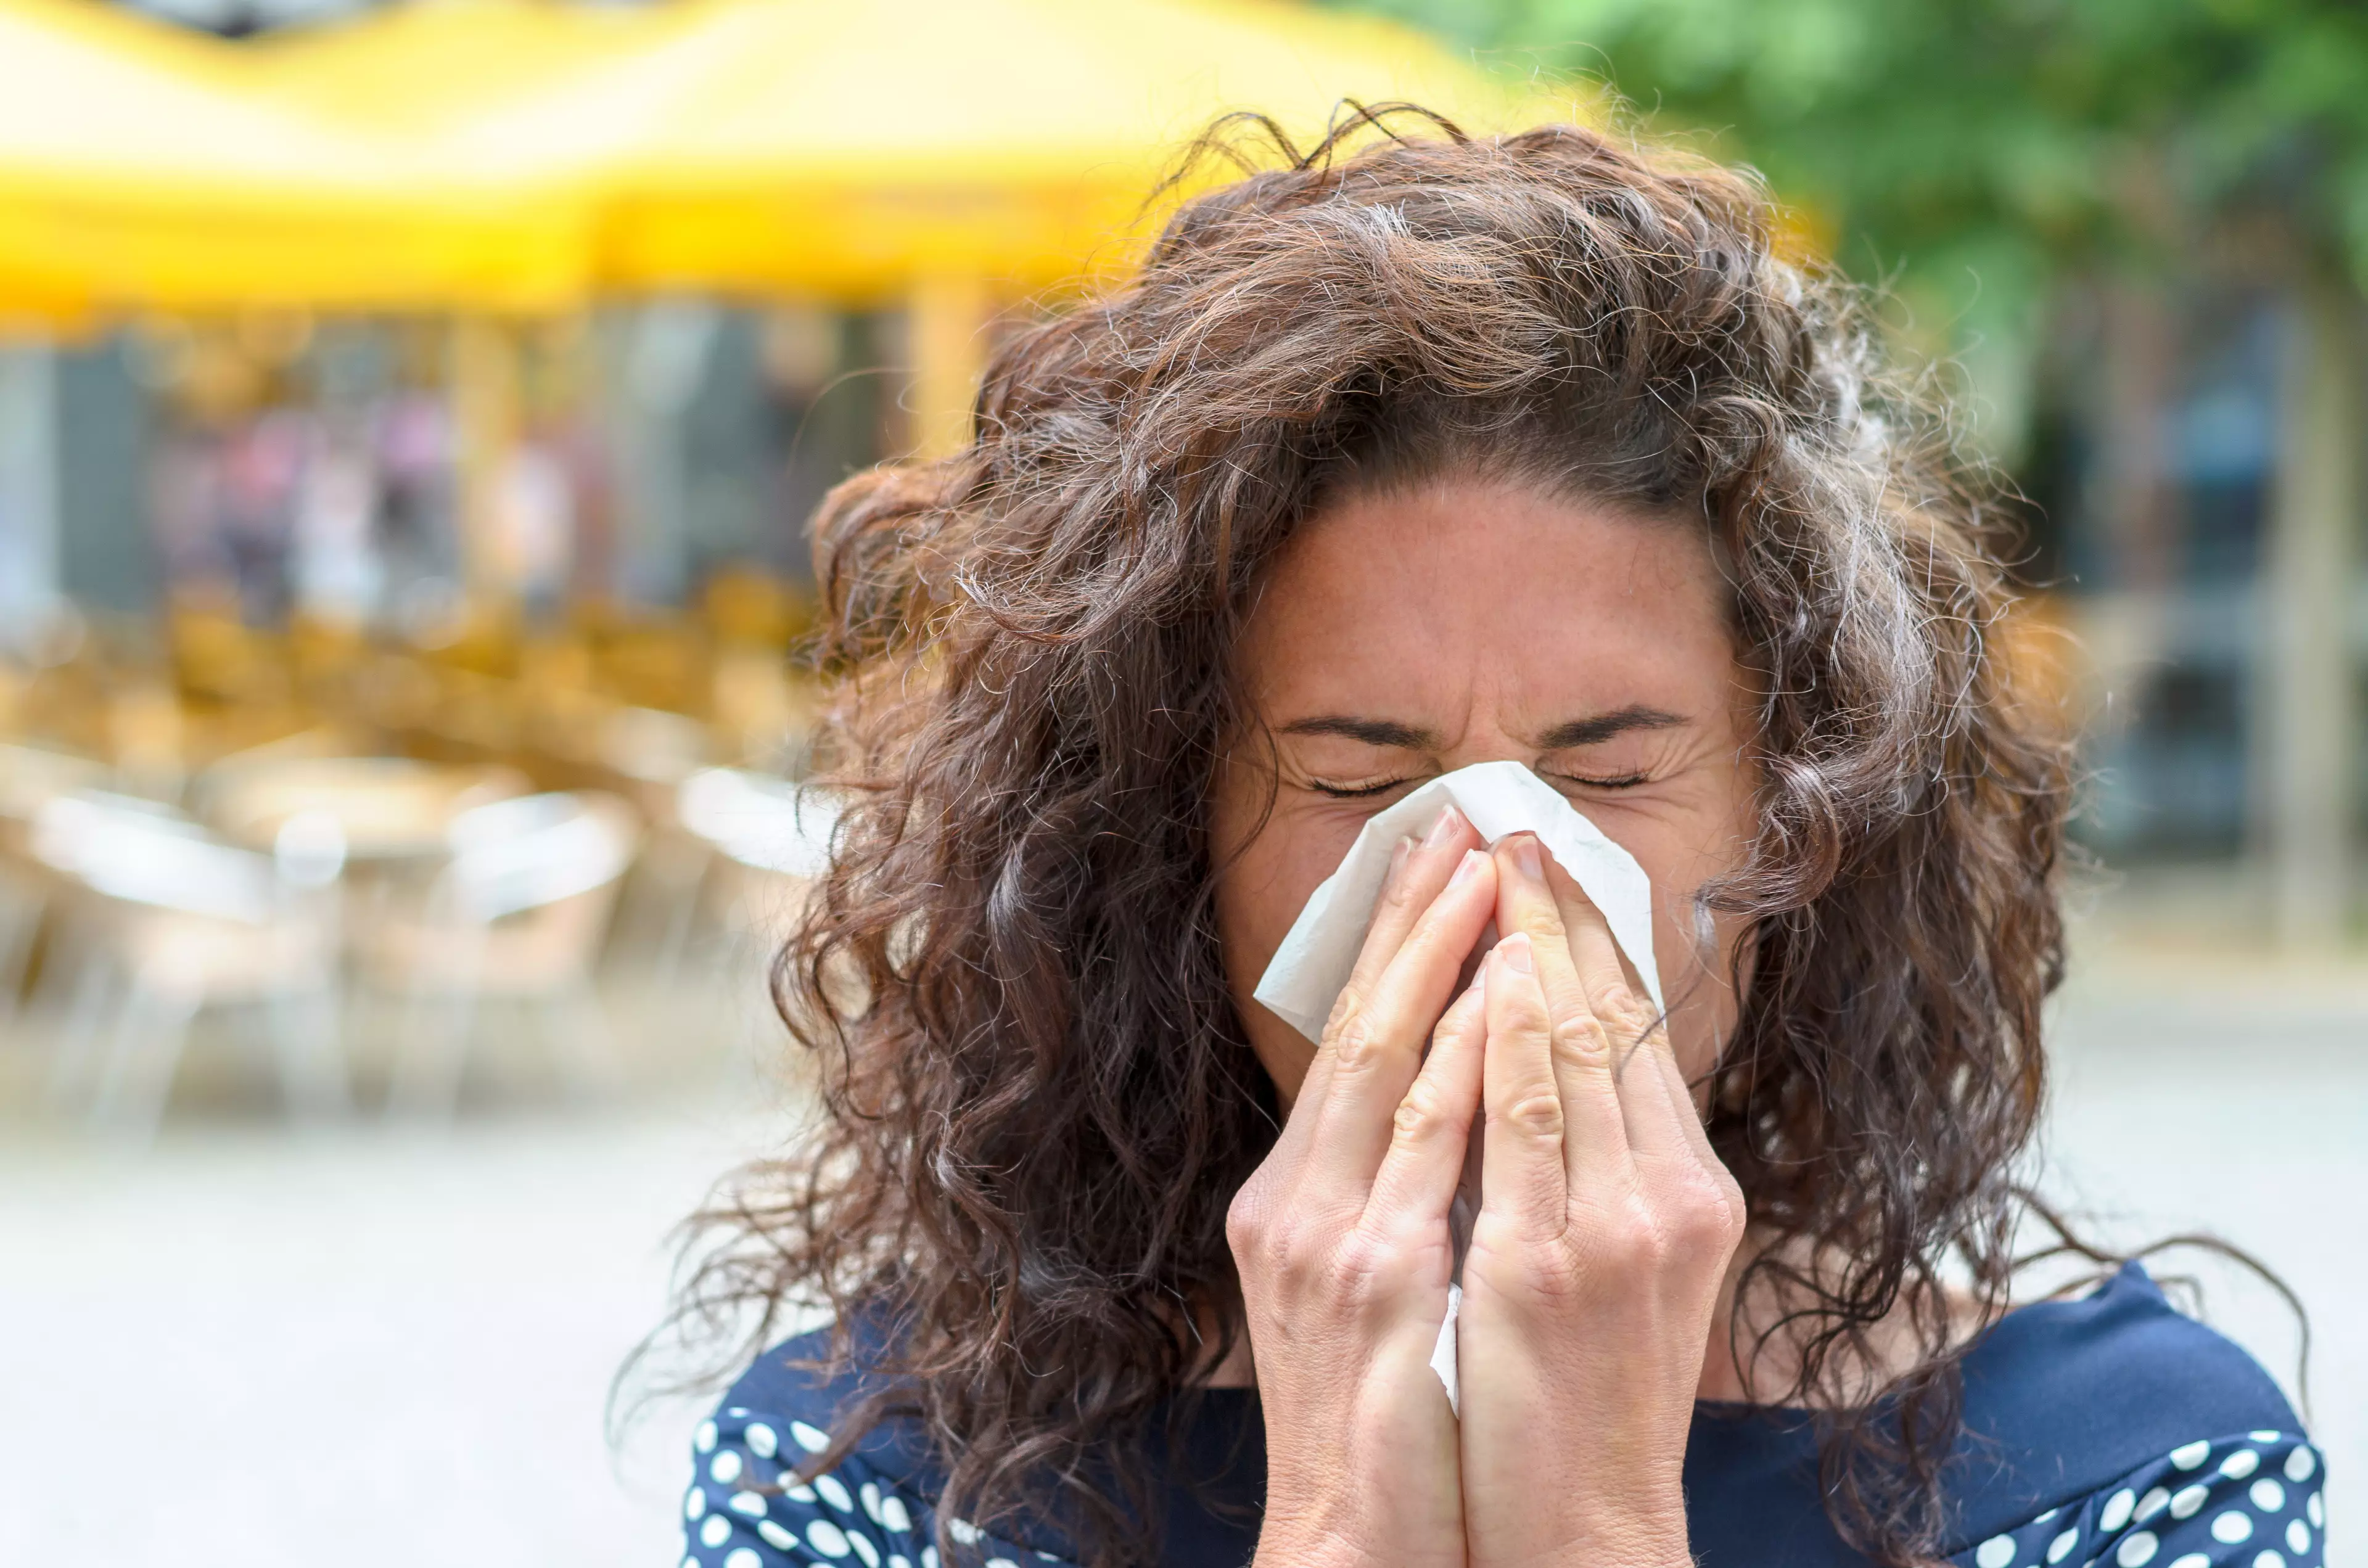 Hay fever sufferers, take note - a pollen bomb is forecast for the bank holiday weekend (